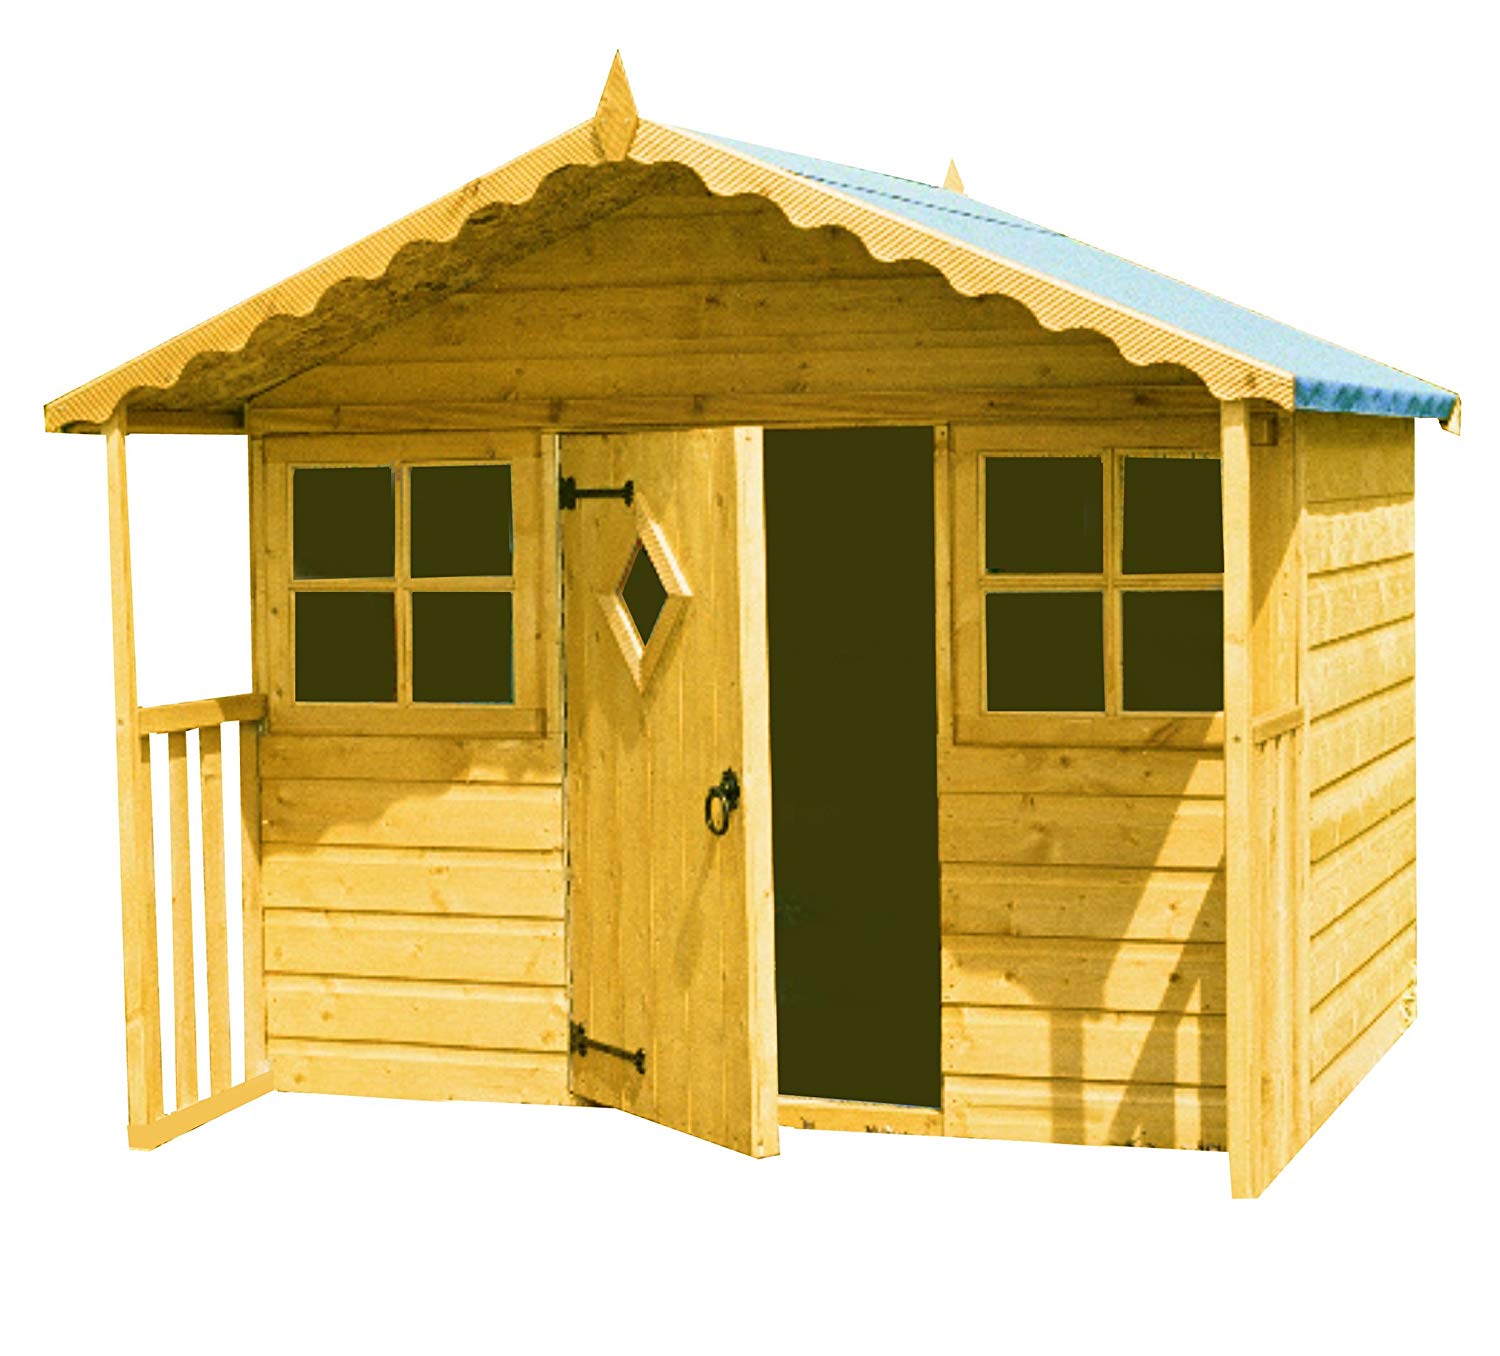 Shire Cubby Playhouse